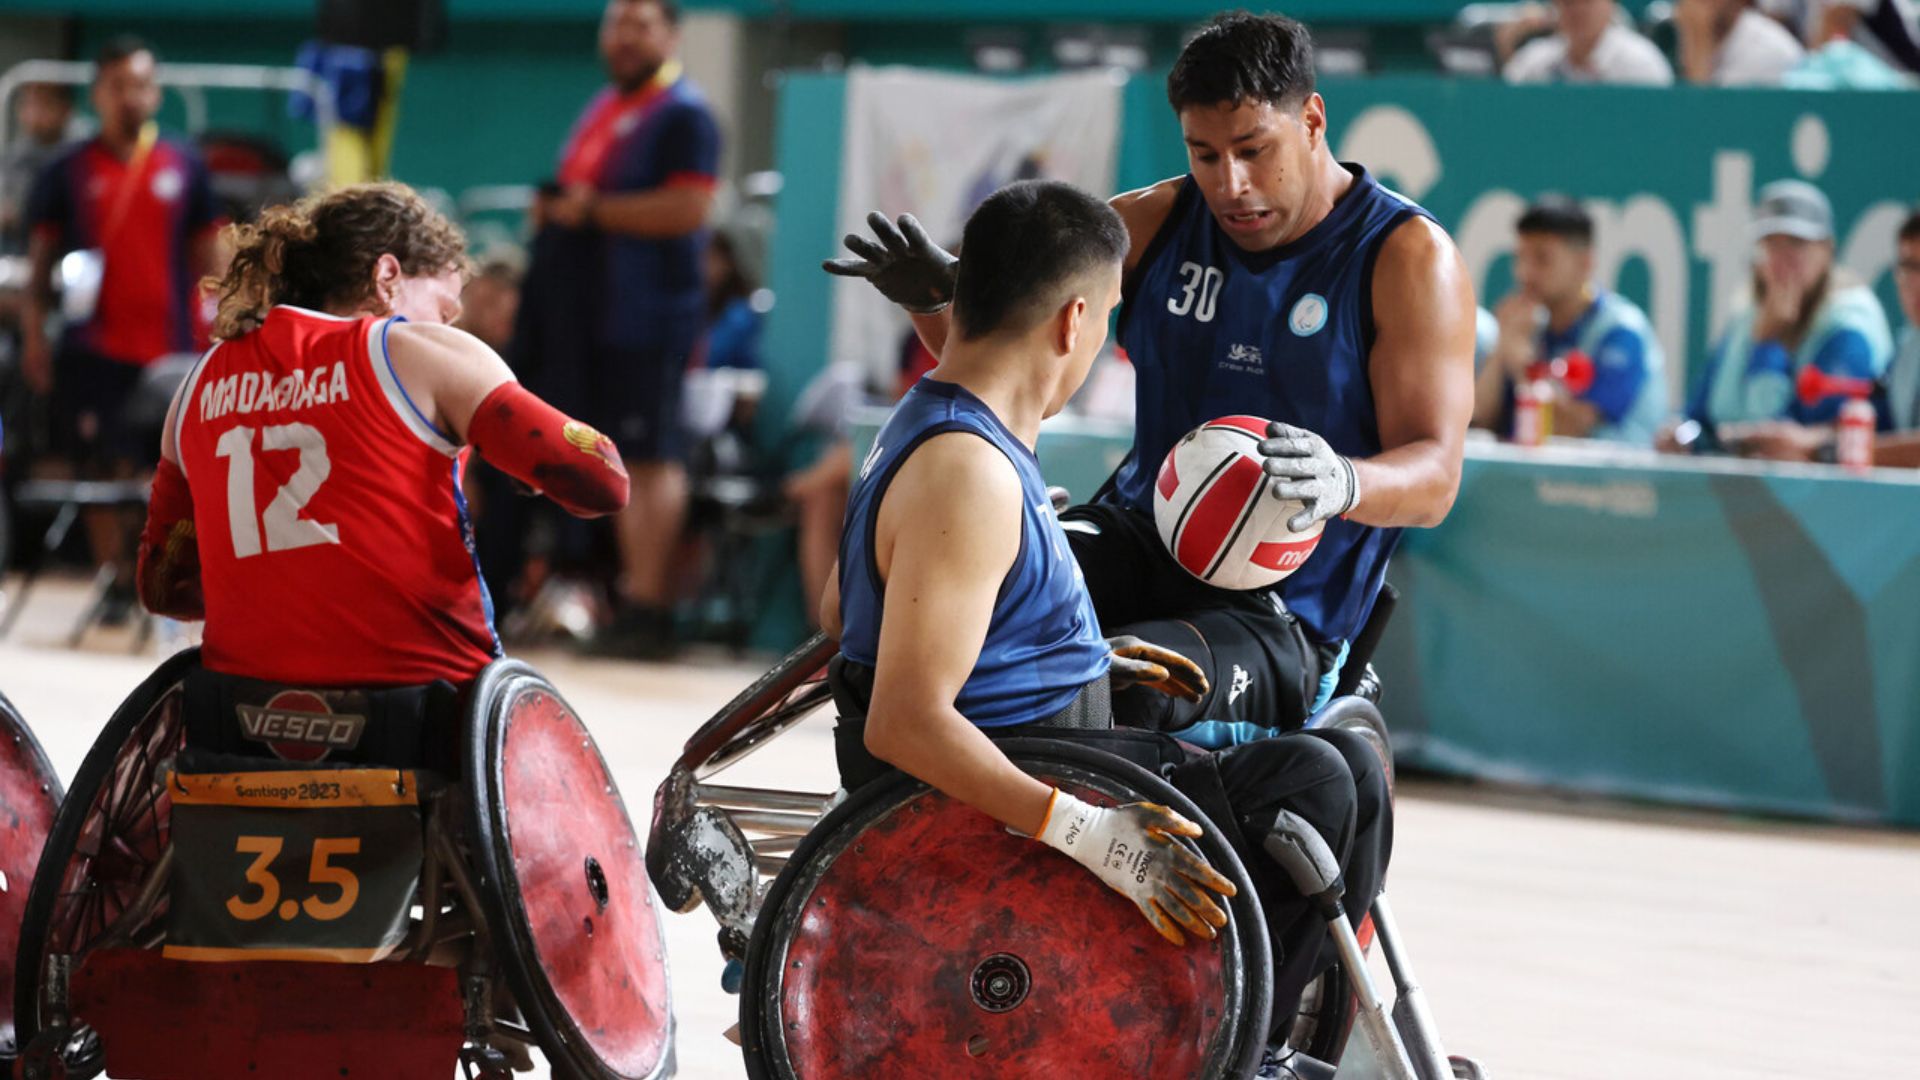 Argentina Secures Decisive Victory Over Chile in Wheelchair Rugby